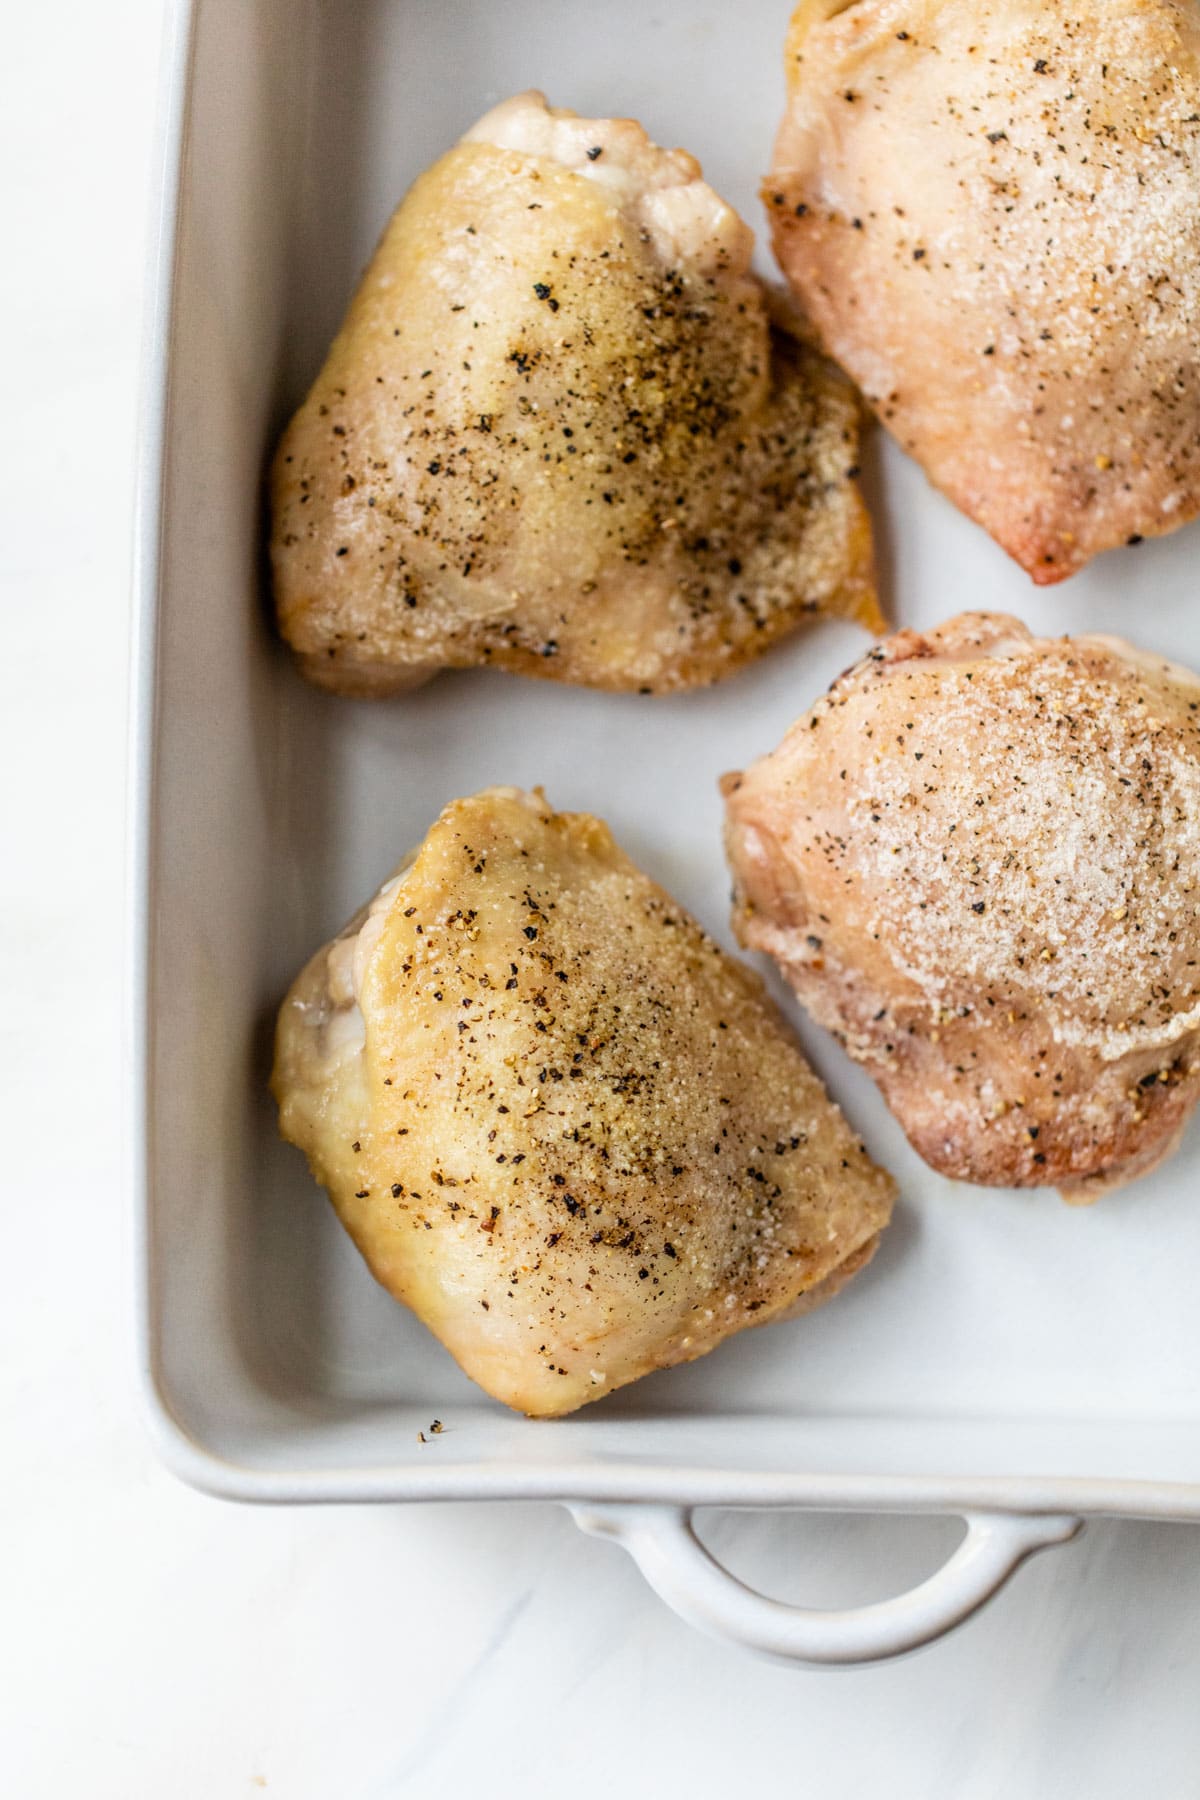 crispy chicken thighs seasoned with salt and pepper